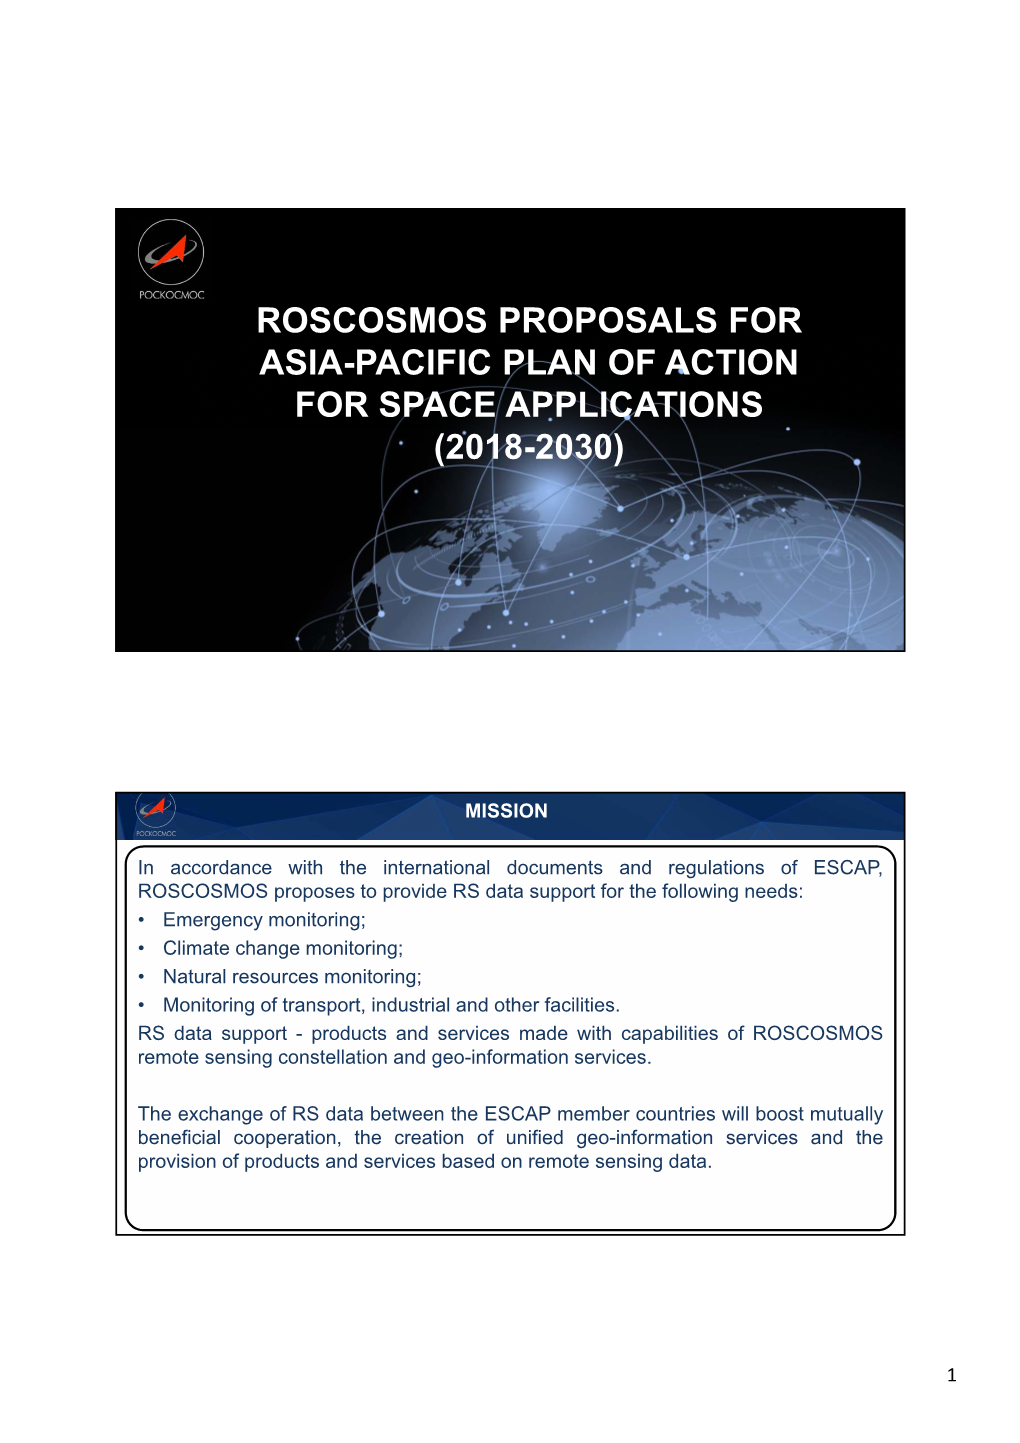 Roscosmos Proposals for Asia-Pacific Plan of Action for Space Applications (2018-2030)